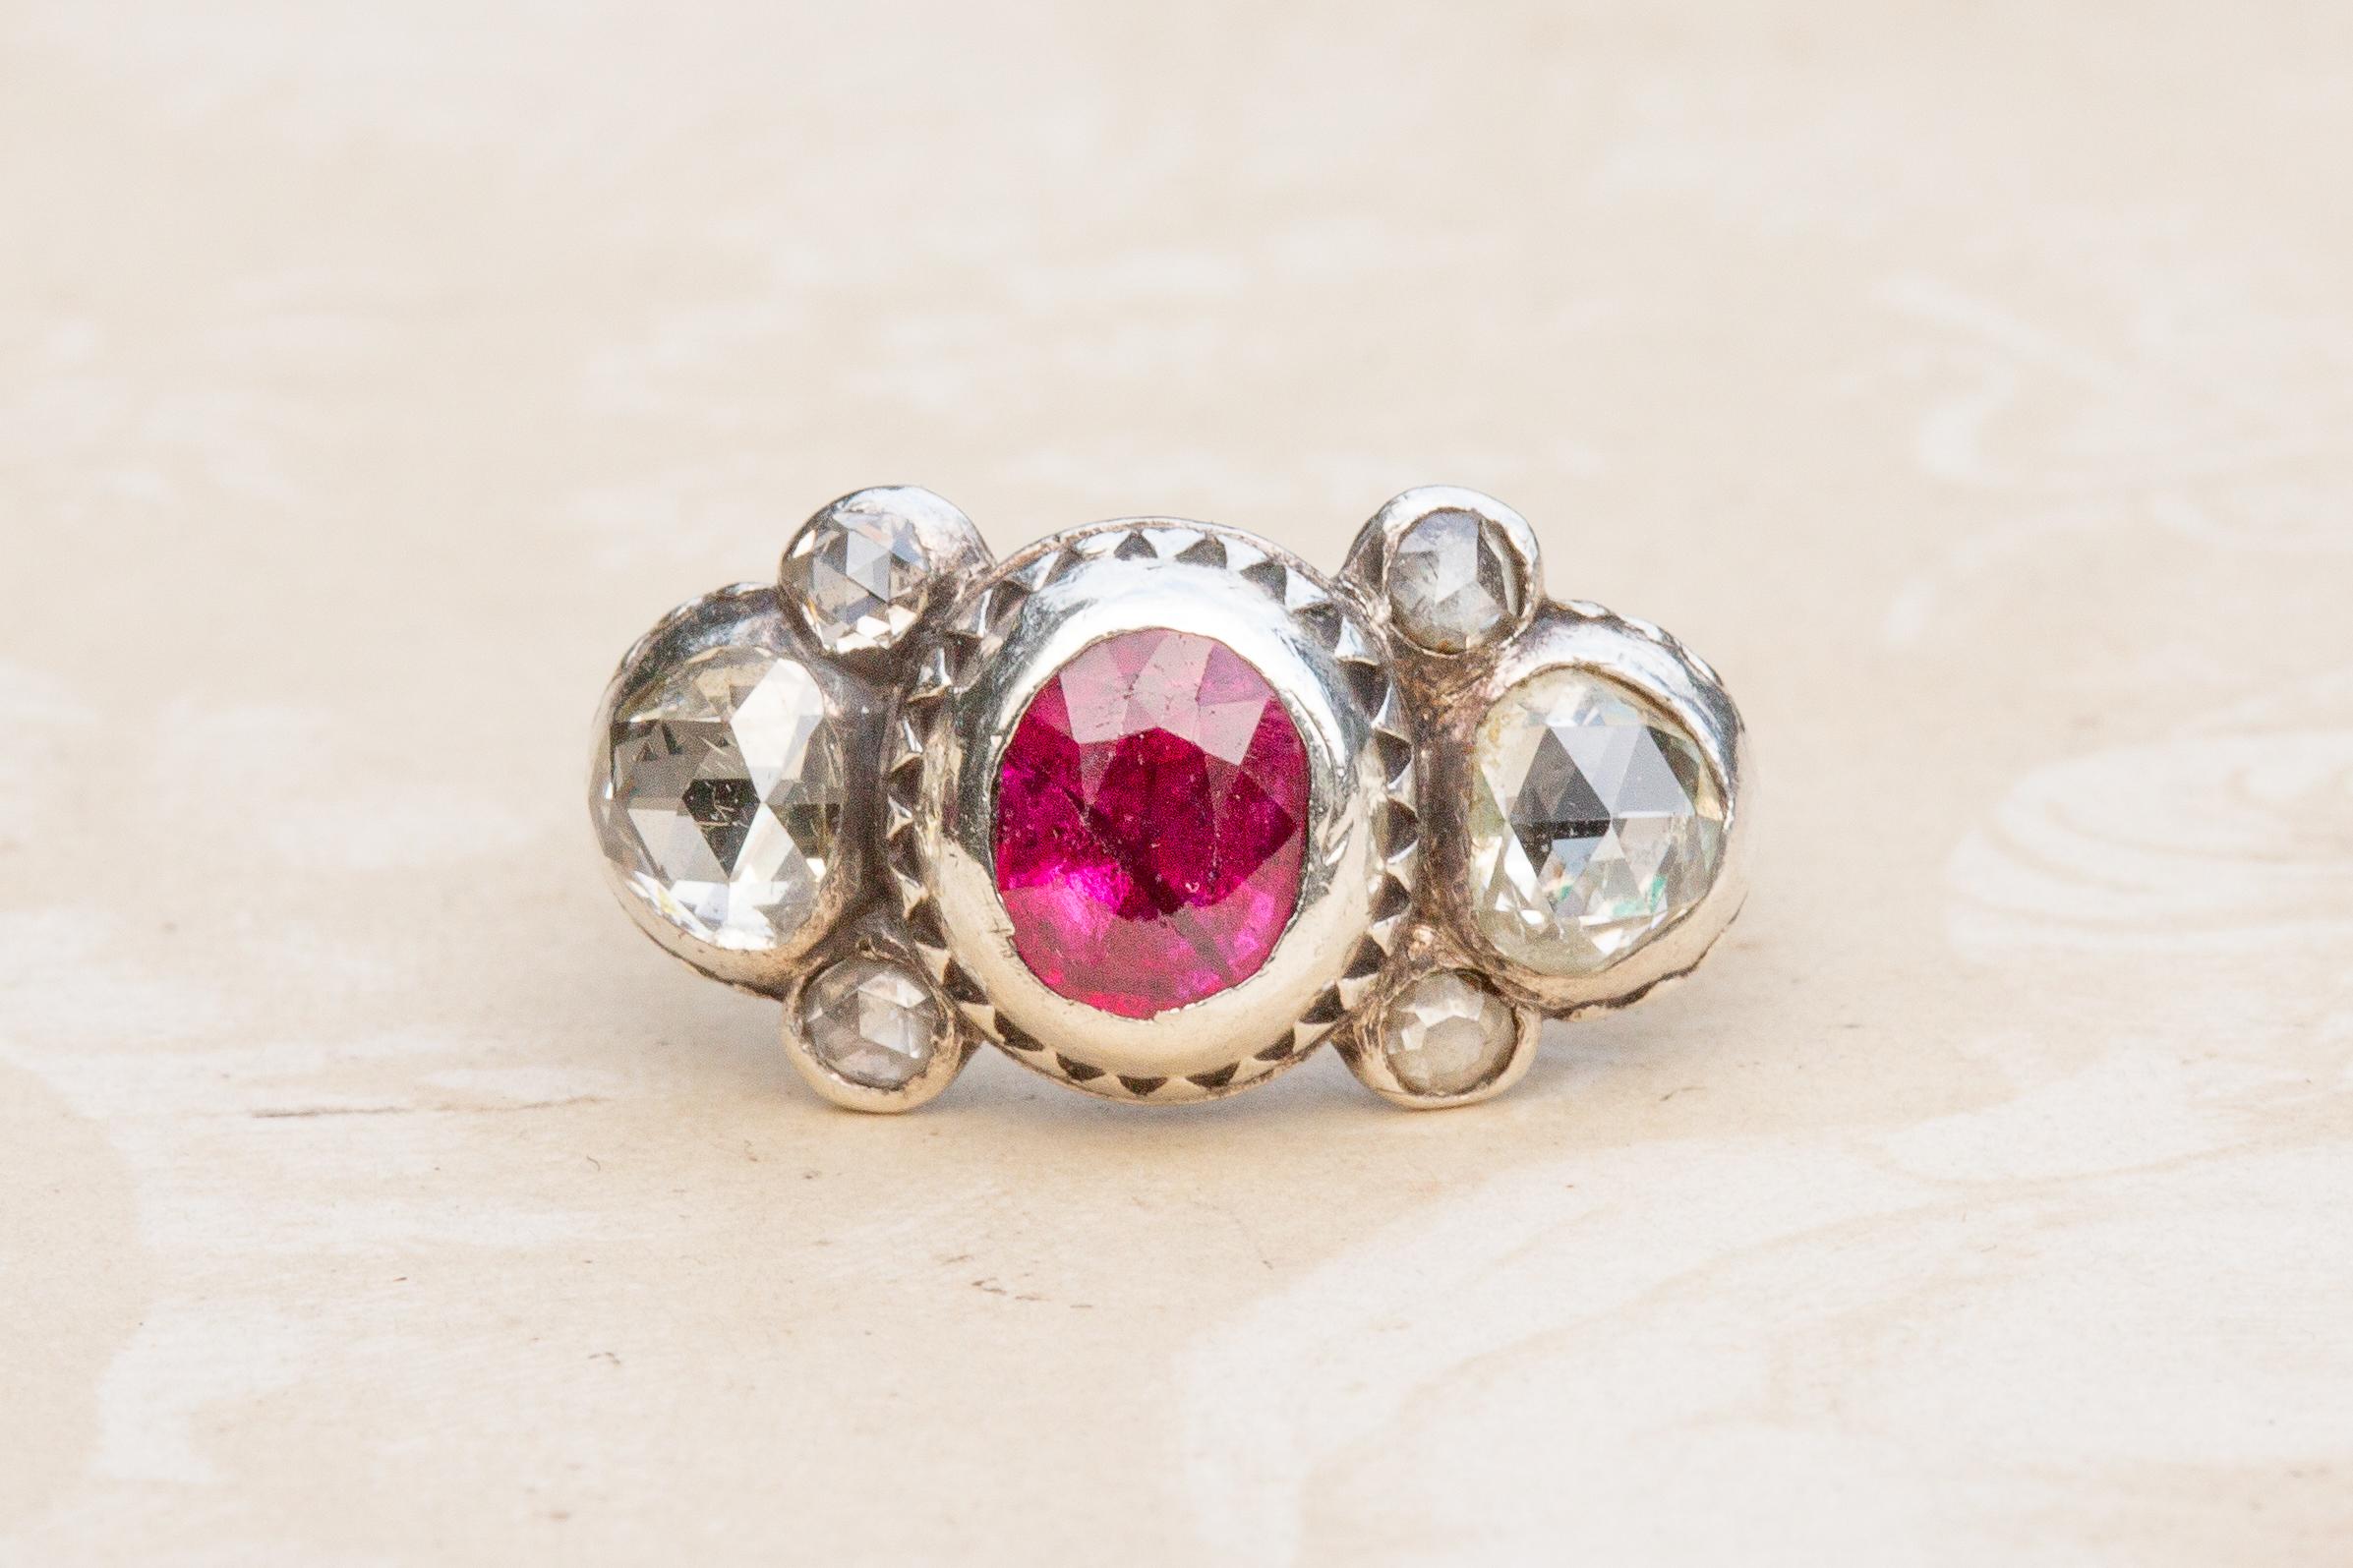 A fine example of a scarce seven-stone ruby and rose cut diamond ring dating from the early 18th century, circa 1700. The ring was made in Western Europe (probably Germany) and truly encapsulates the beauty and grandeur of the Baroque period. 

This